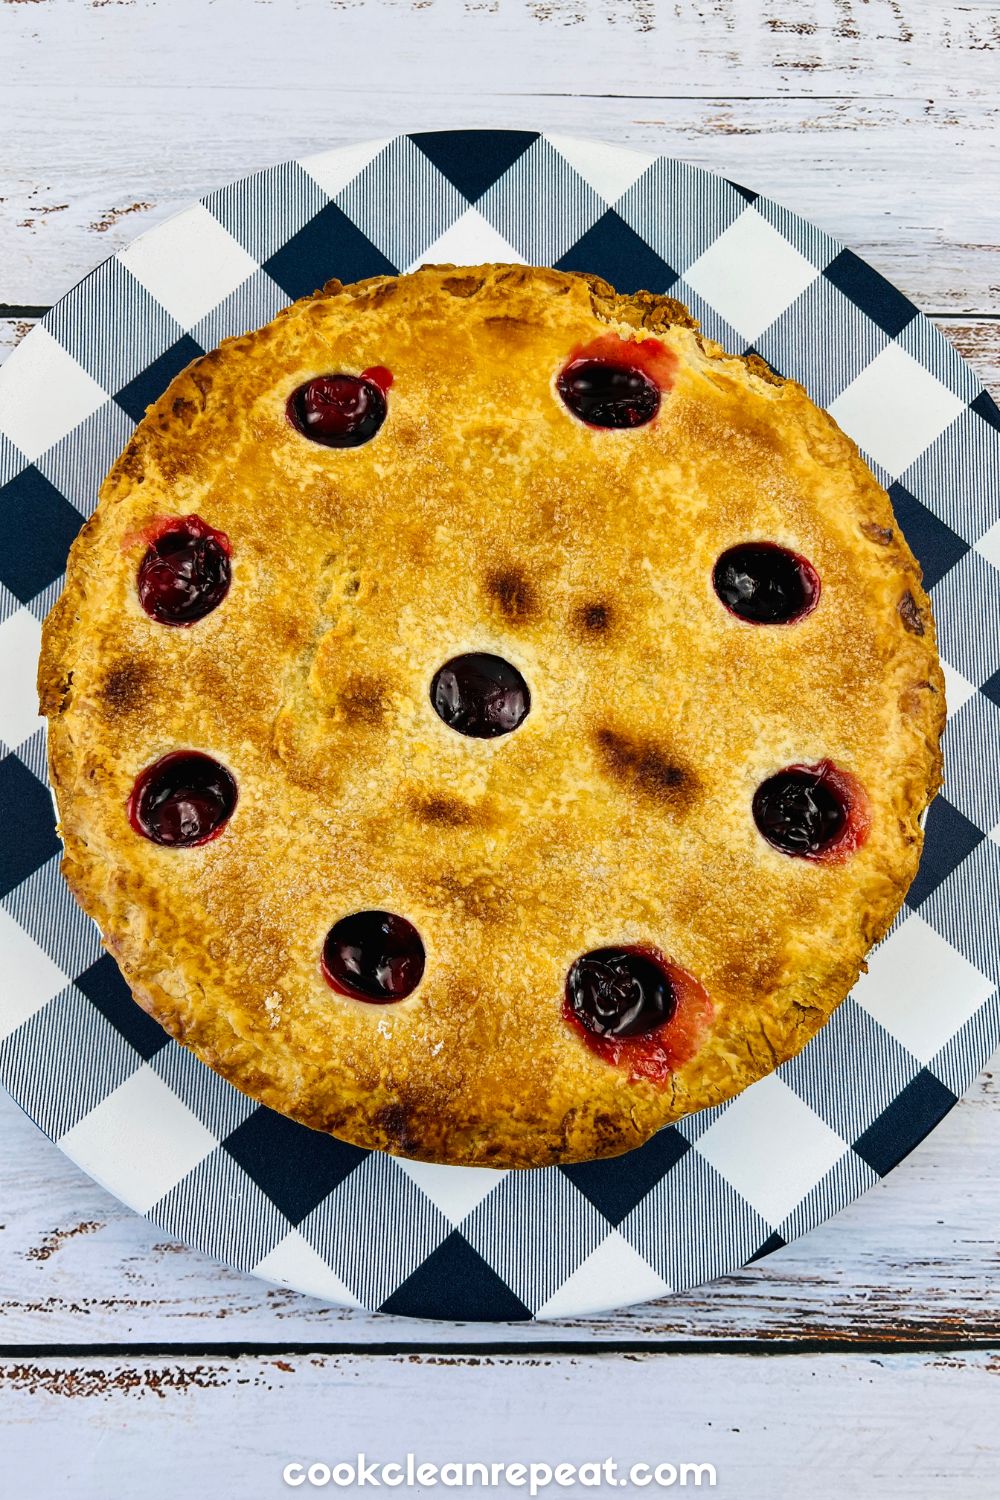 a baked cherry pie made with canned filling